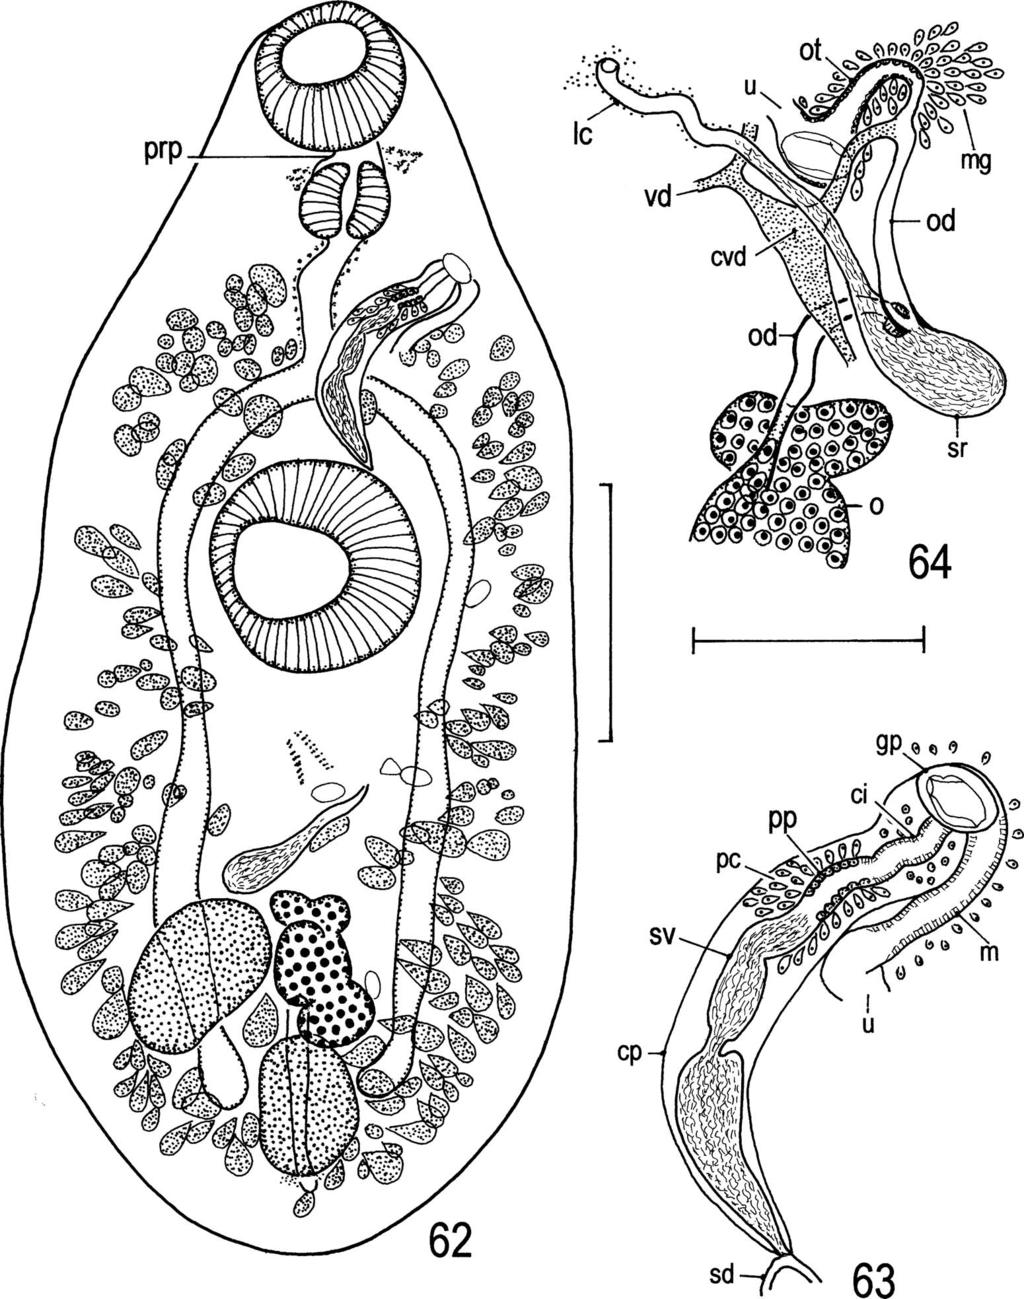 Digeneans (Trematoda) Parasitic in Freshwater Fishes (Osteichthyes) of the Lake Biwa Basin in Shiga 49 Figs. 62 64. Neoplagioporus zacconis.